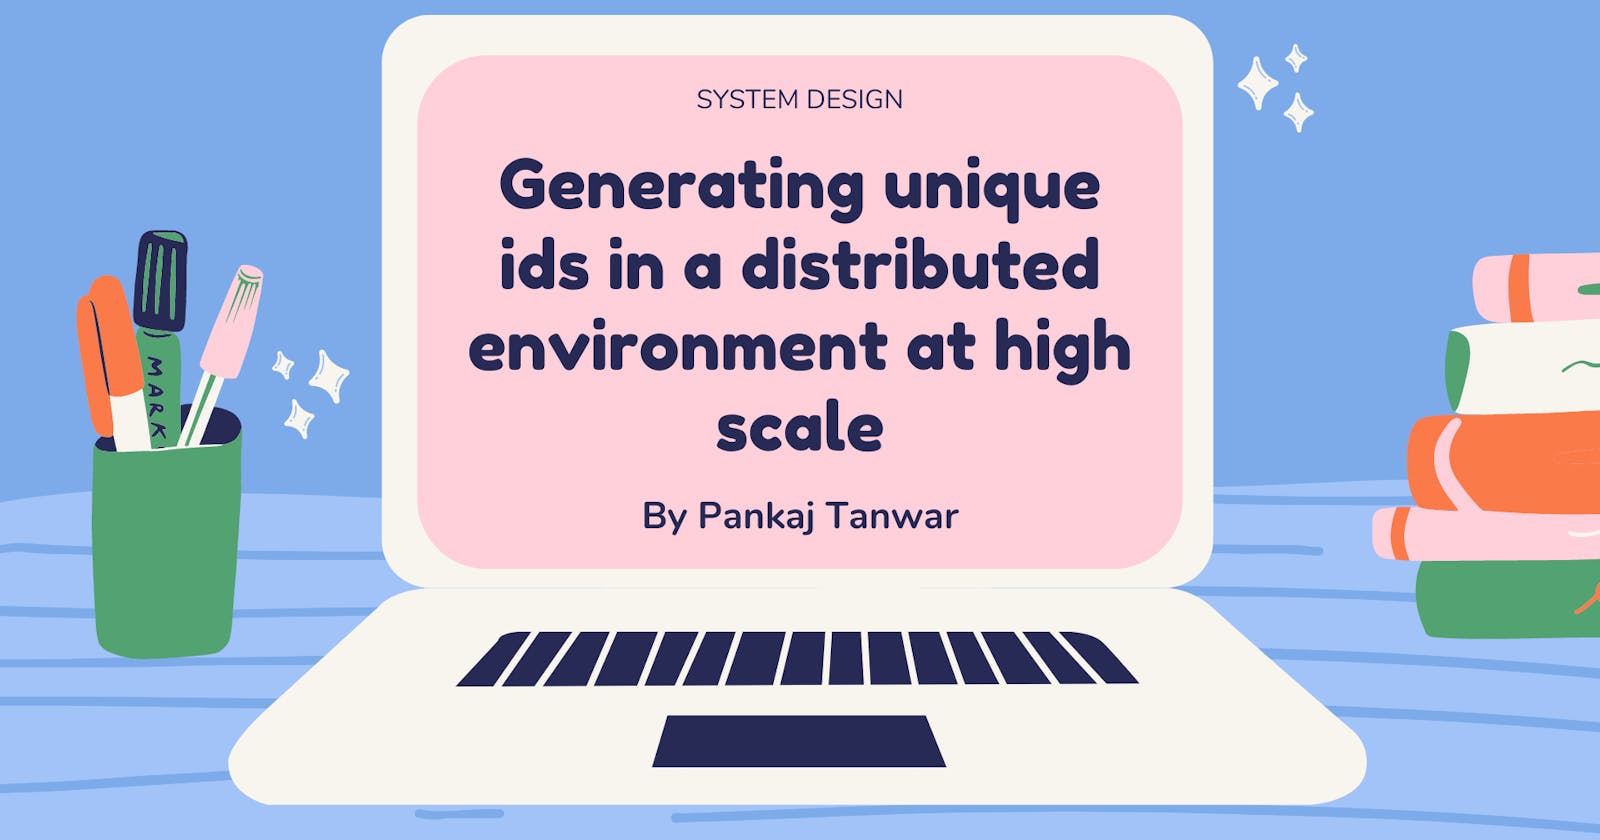 Generating unique IDs in a distributed environment at high scale.